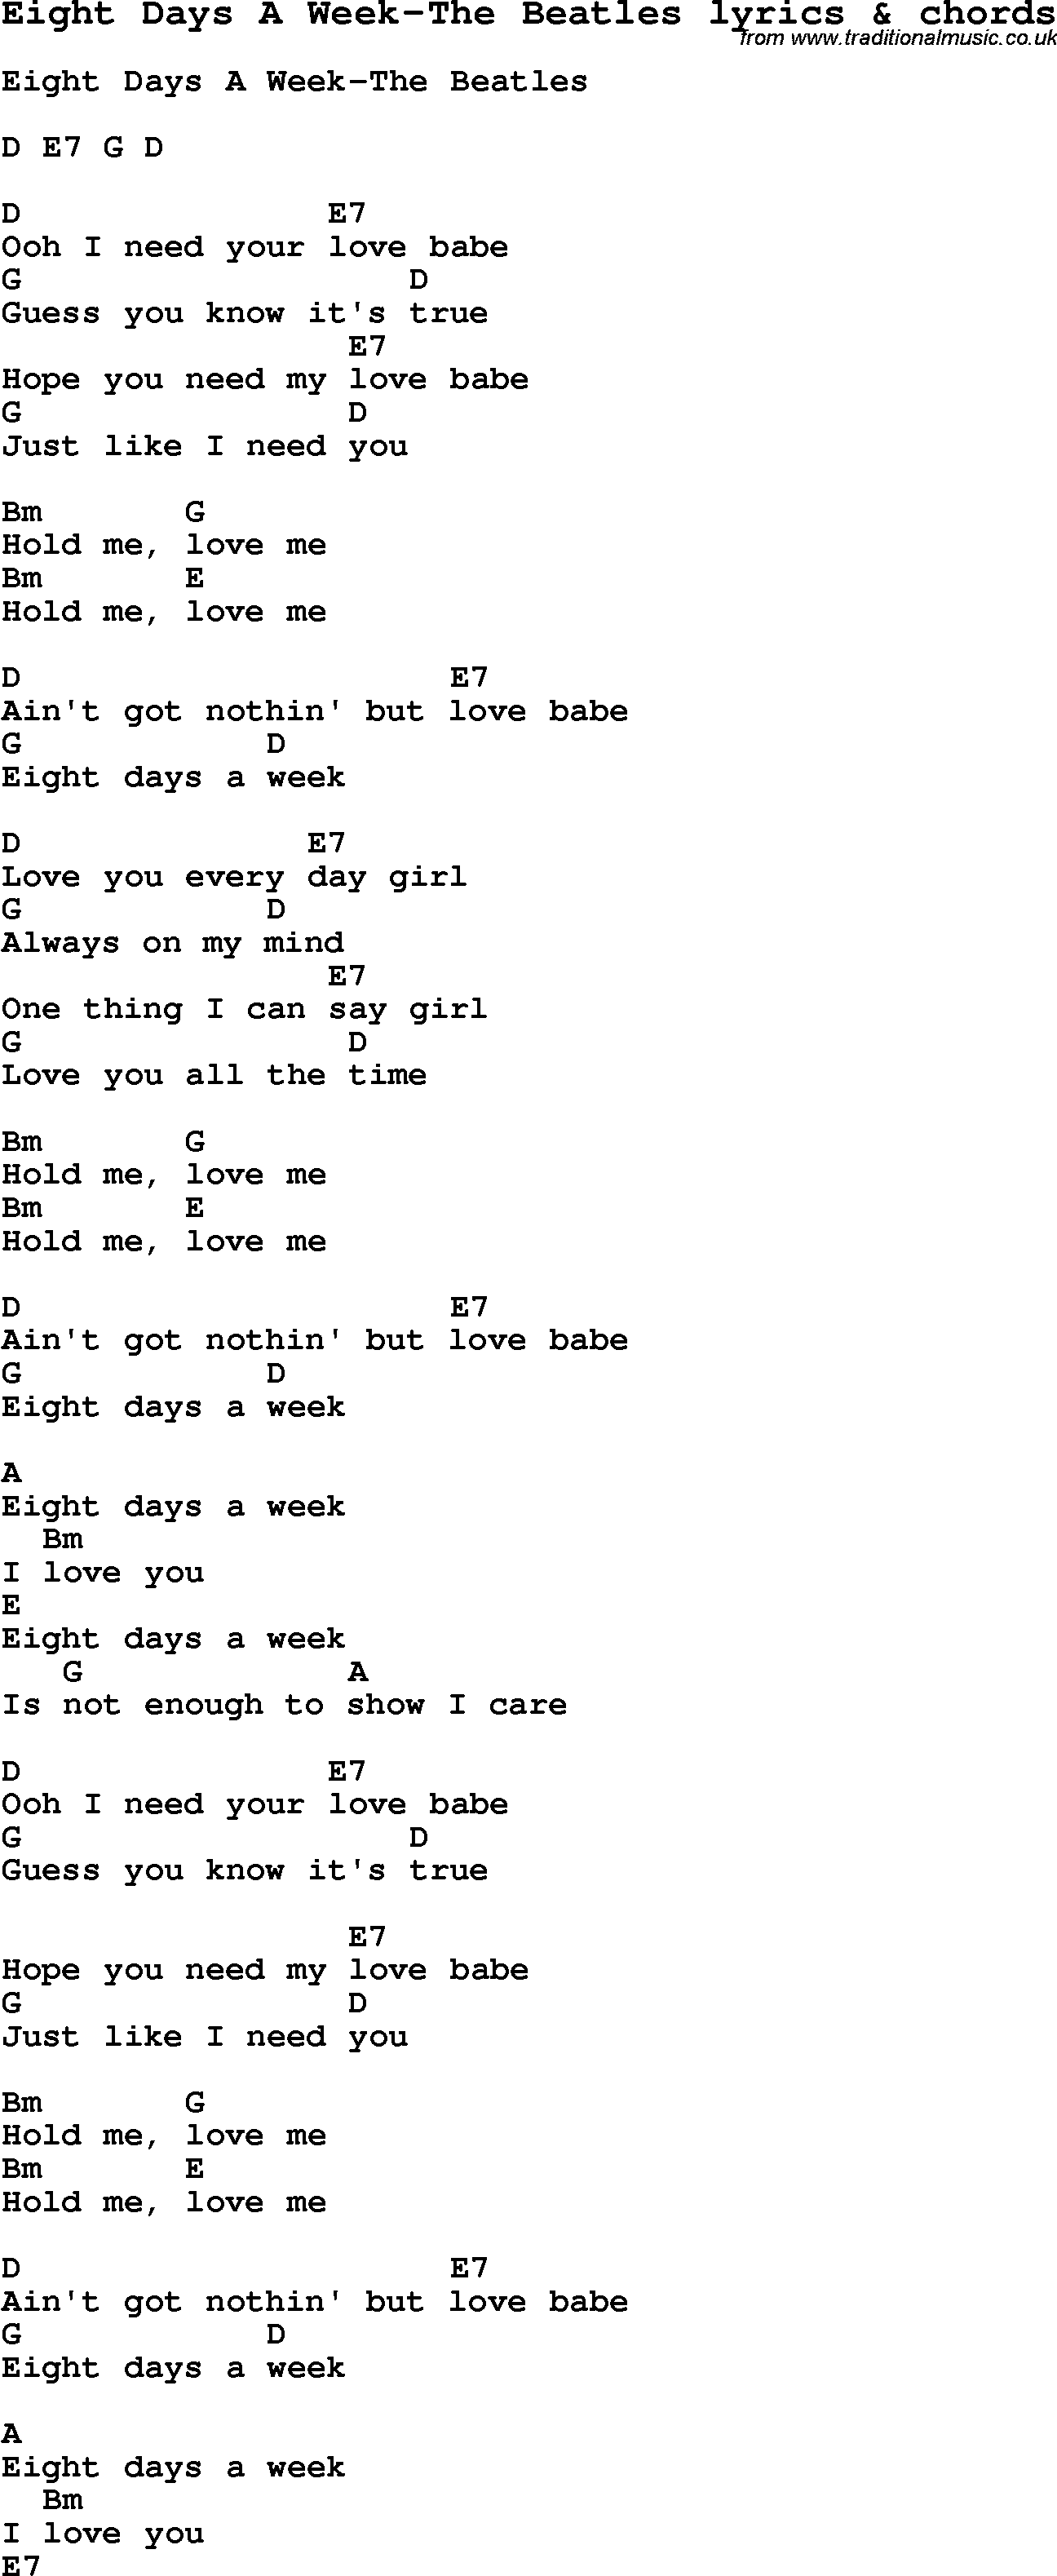 Love Song Lyrics for: Eight Days A Week-The Beatles with chords for Ukulele, Guitar Banjo etc.